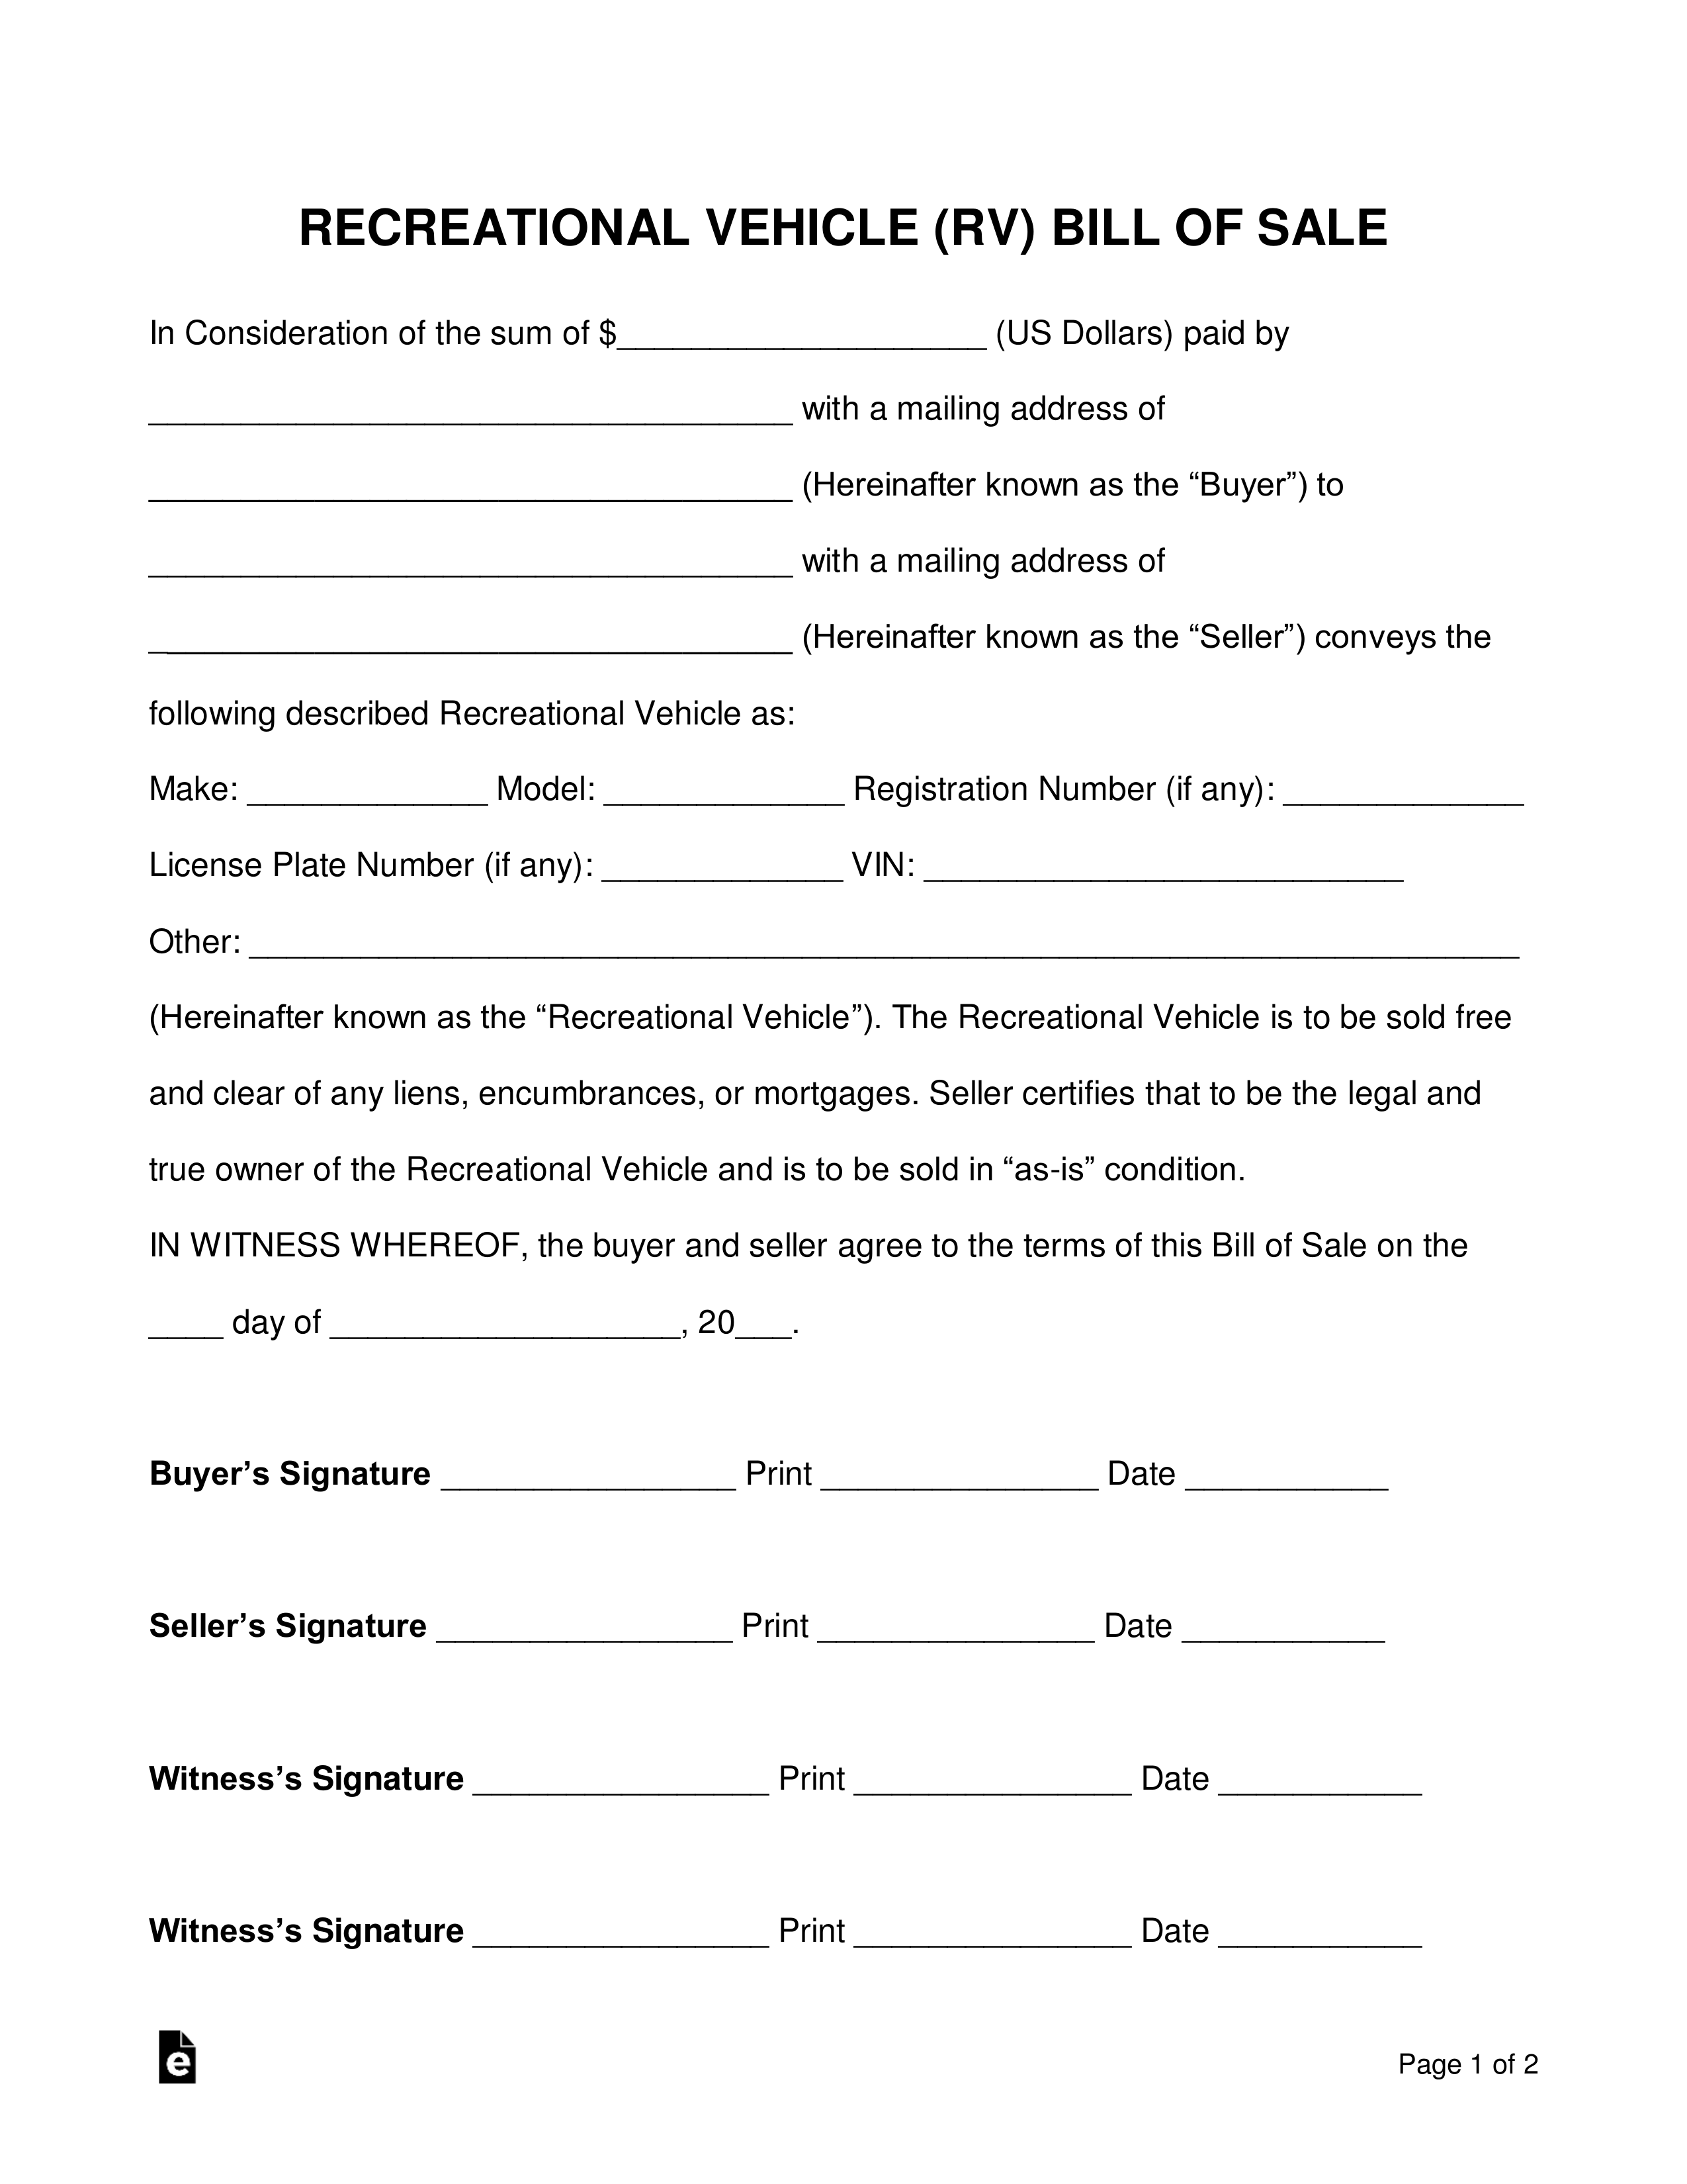 Free Recreational Vehicle (RV) Bill Of Sale Form – Word  PDF – EForms With Deposit Form For Bill Of Sale